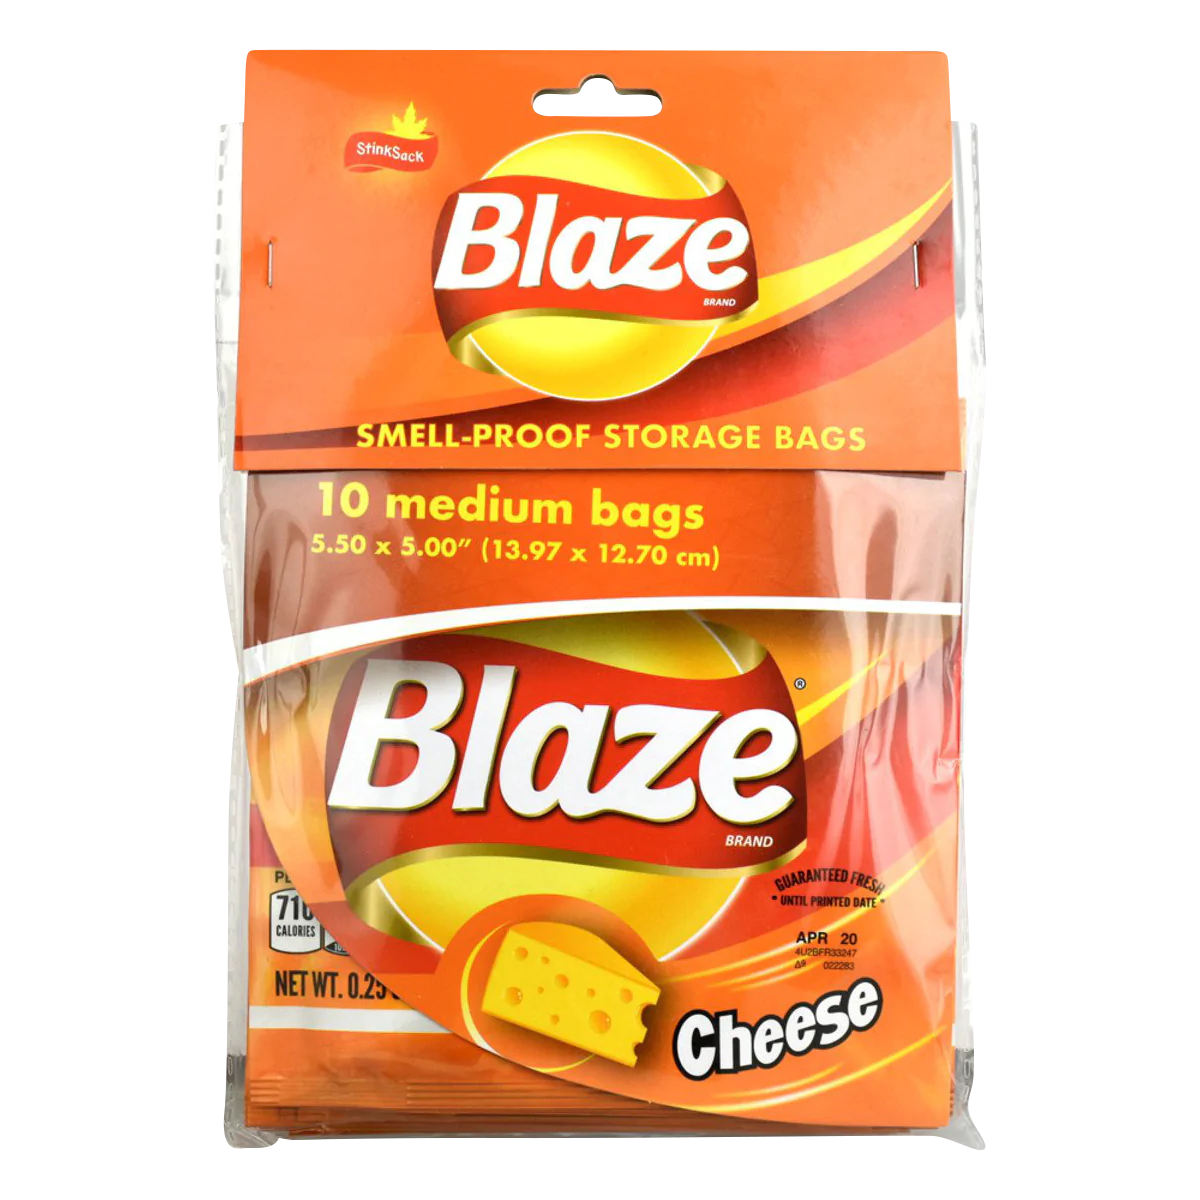 Stink Sack "Blaze" Chips themed smell-proof bags, 10-pack, front view on white background